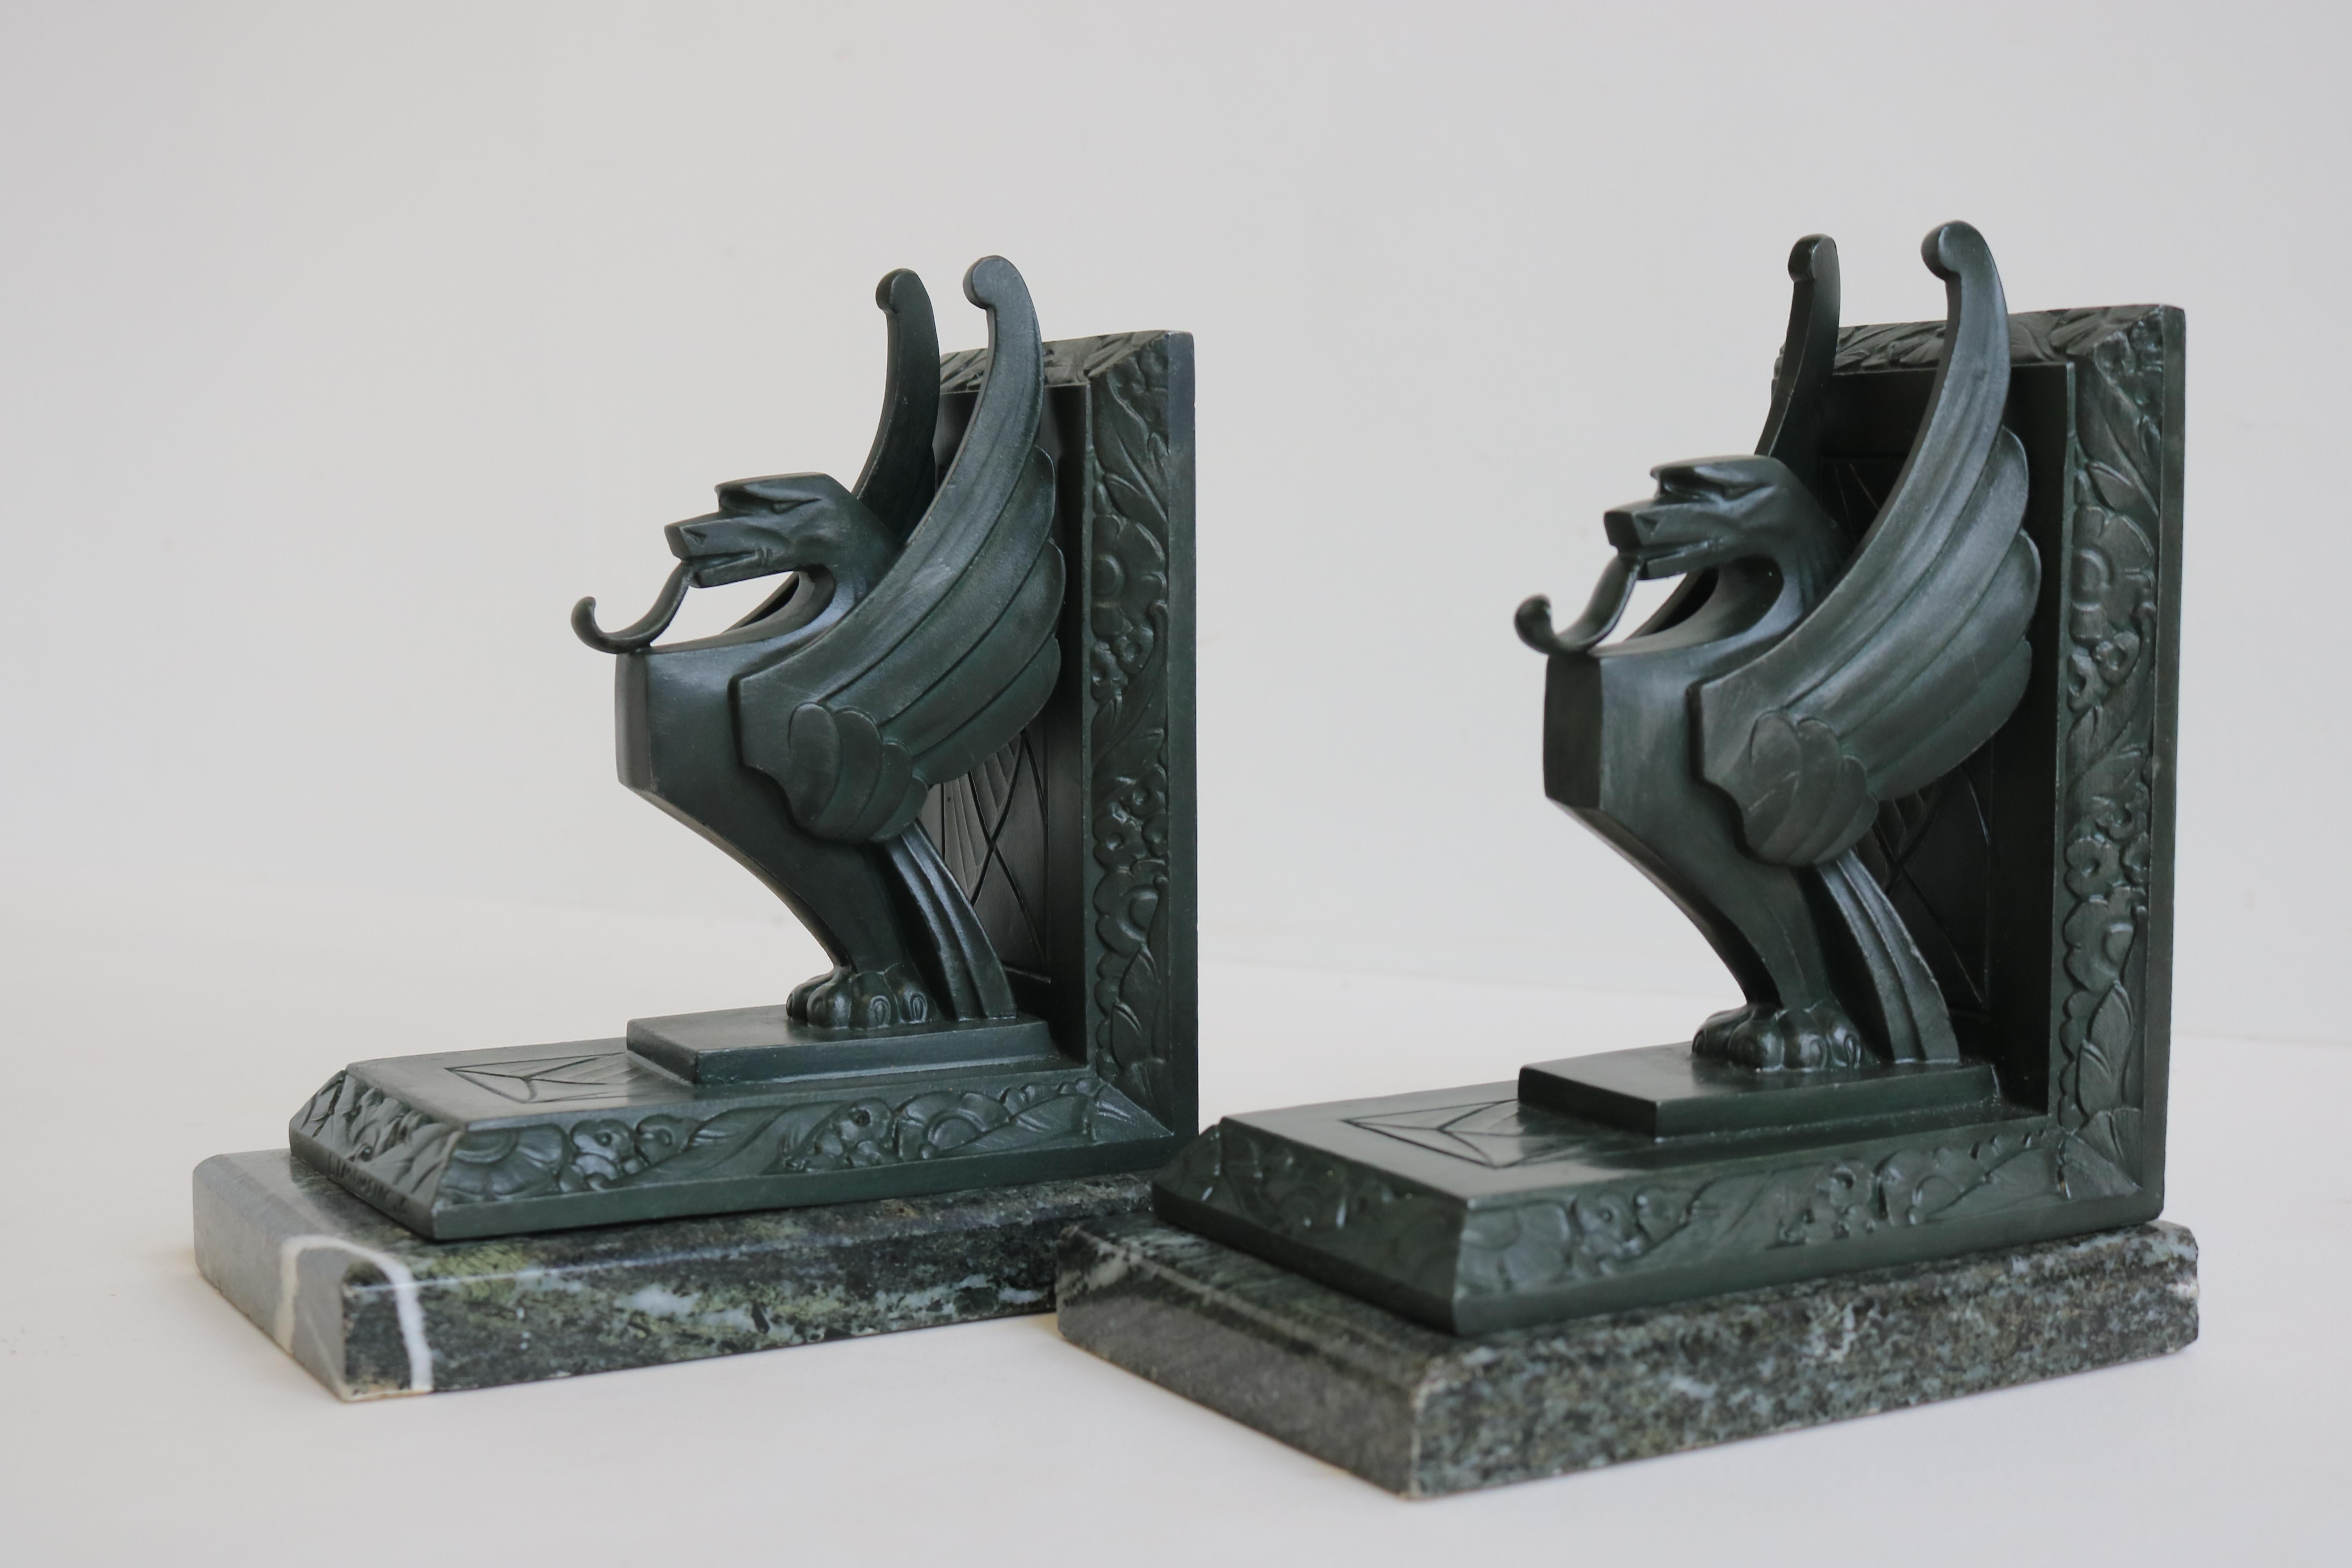 Antique French Art Deco Bookends “Griffins” by Limousin France 1930 Green Marble 5